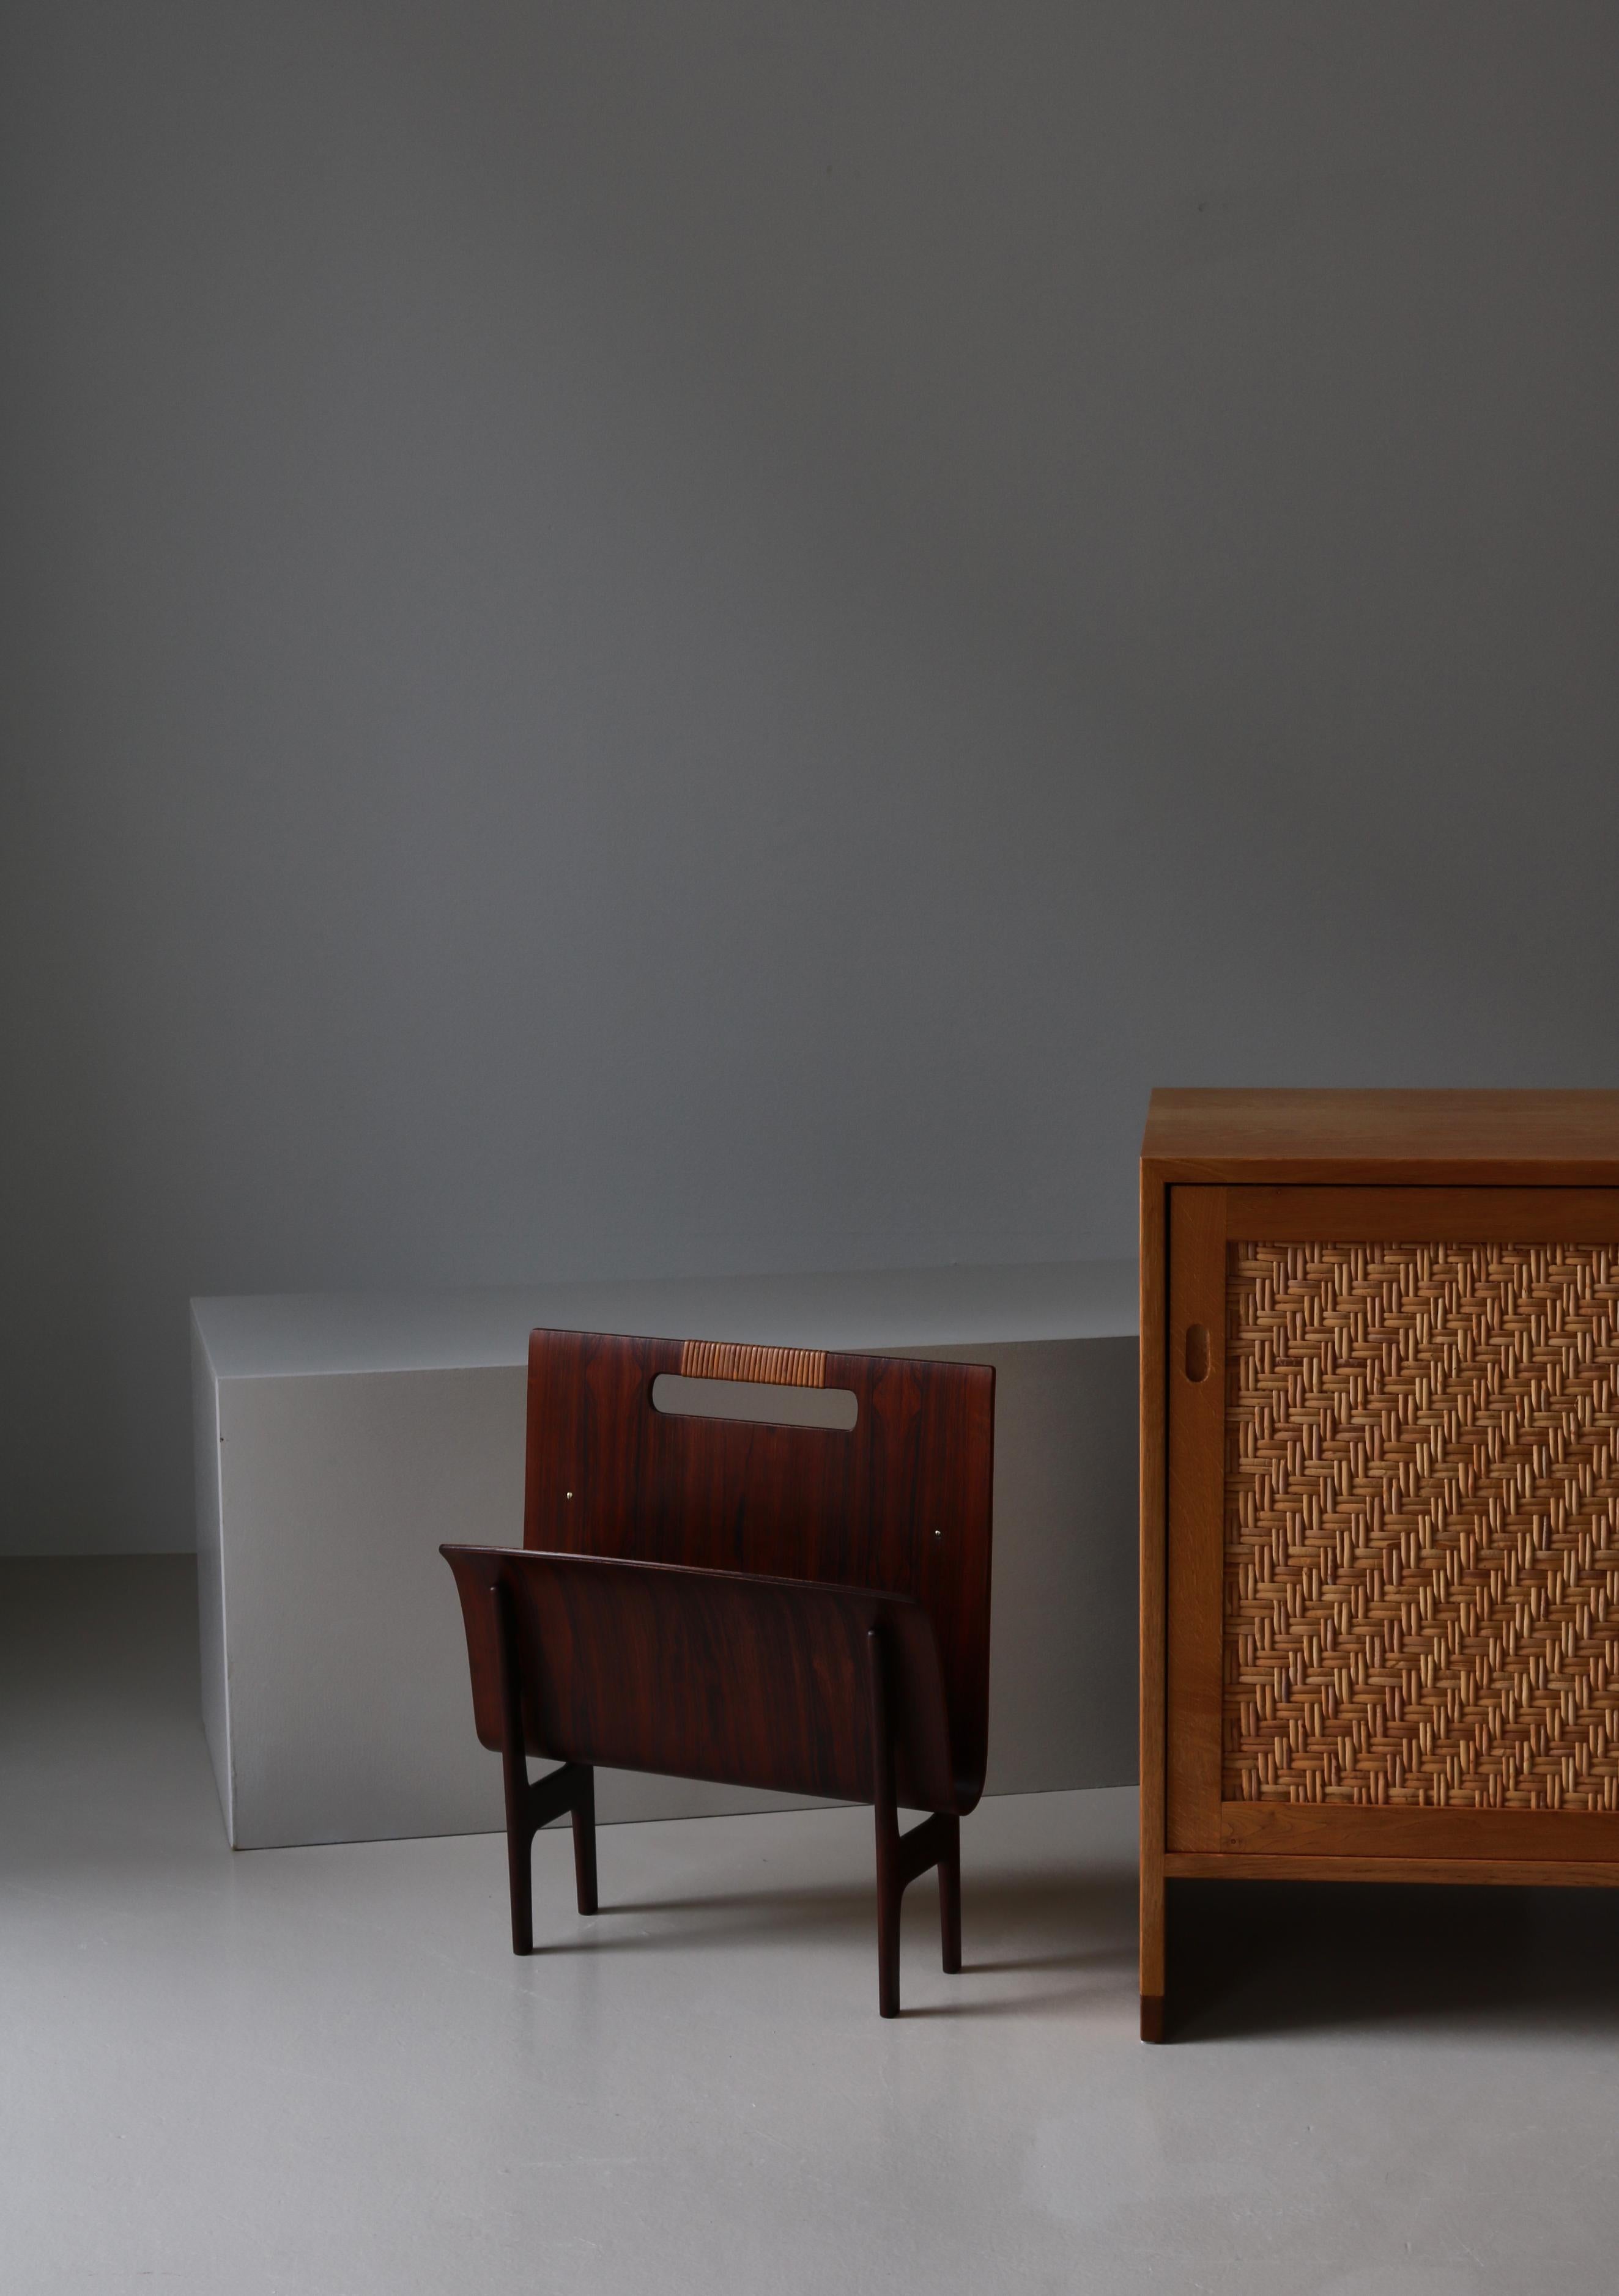 Rare & beautiful magazine stand in rosewood and rattan cane by Danish designers Ejner Larsen & Aksel Bender Madsen. Made in the 1960s. 

Danish design duo Ejner Larsen (1917—1987) and Aksel Bender Madsen (1916—2000) designed some of the most refined